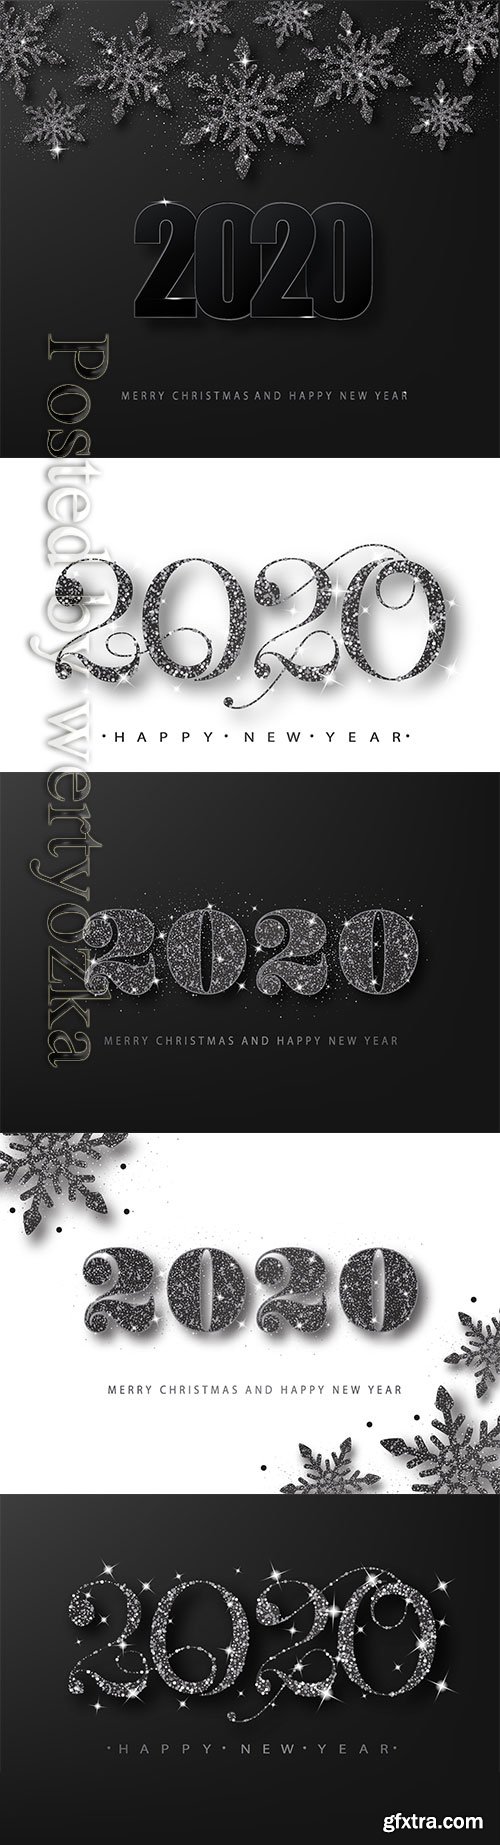 2020 Merry Chistmas and Happy New Year vector illustration # 16